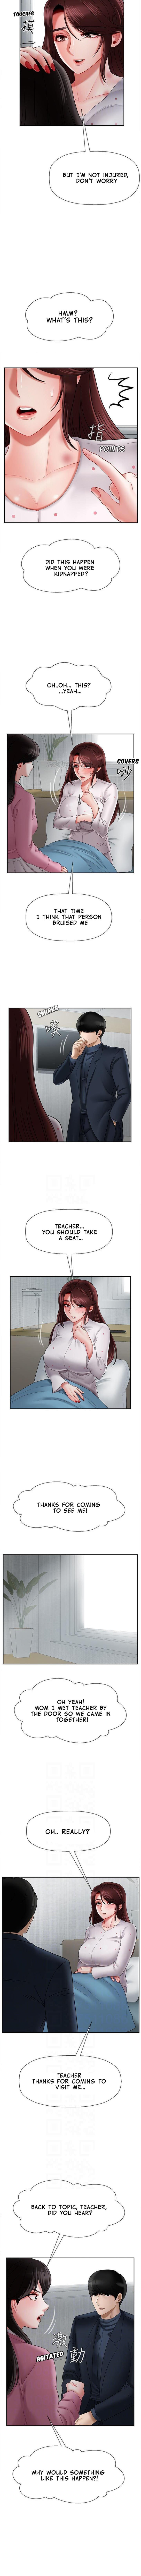 physical-classroom-chap-16-2